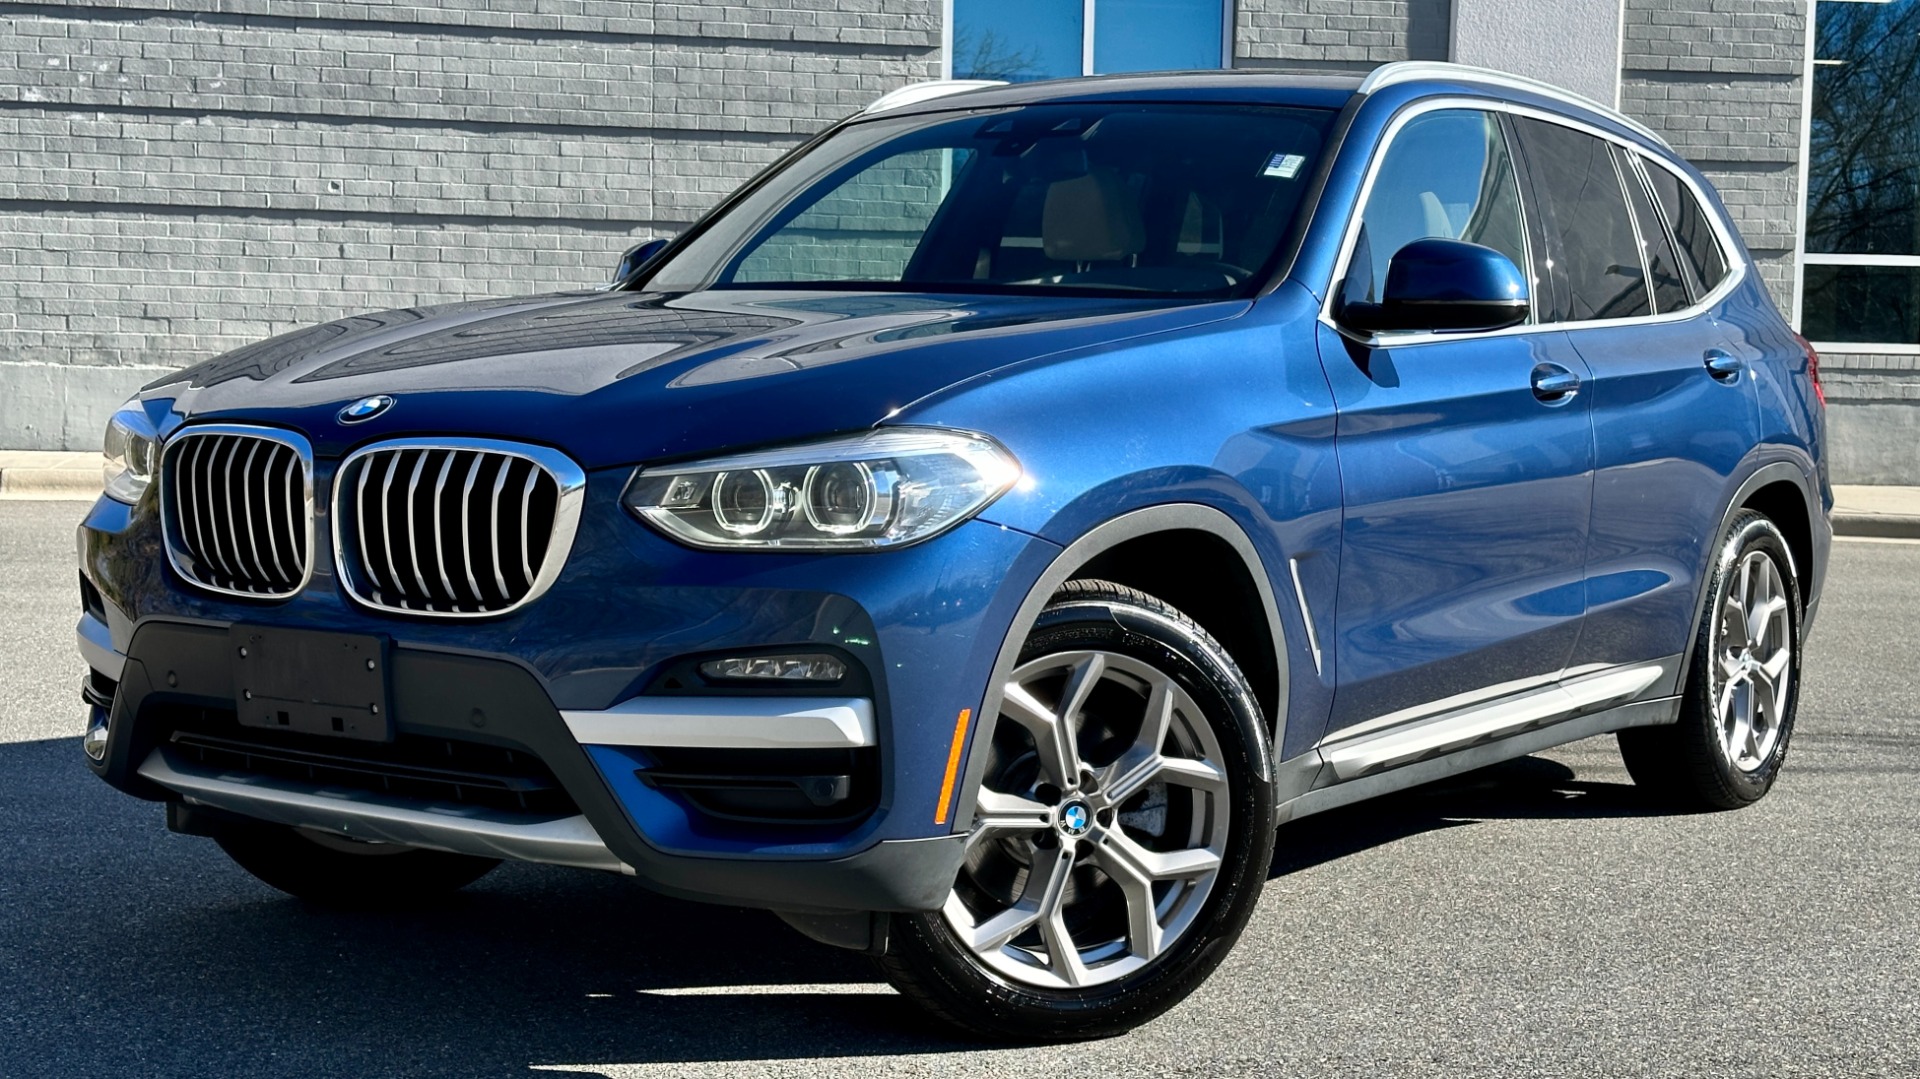 Used 2020 BMW X3 xDrive30i / DRIVER ASSISTANCE / HEATED SEATS / HEATED STEERING / NAV / COCK for sale $29,995 at Formula Imports in Charlotte NC 28227 1